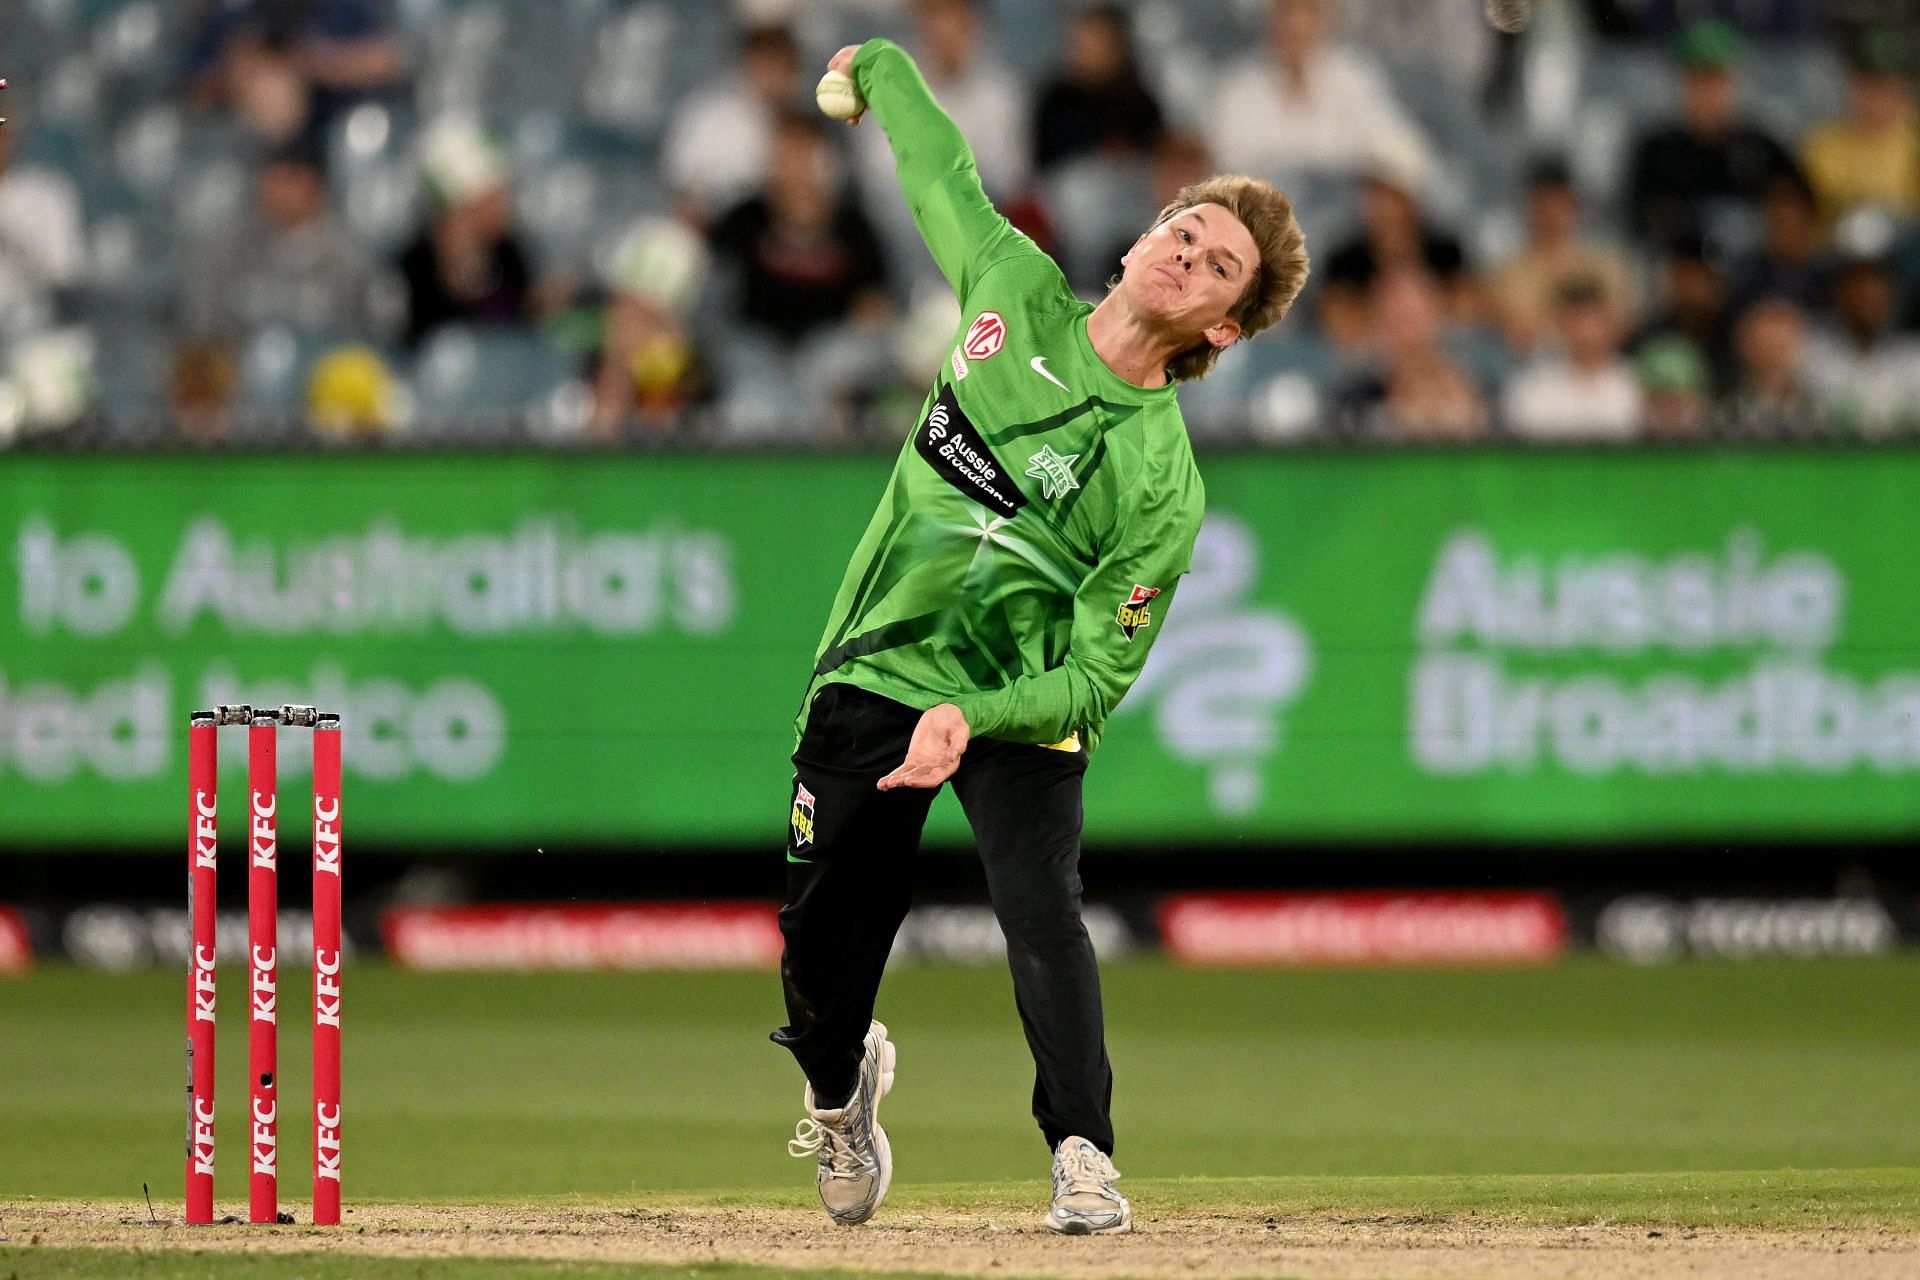 Adam Zampa has a six-wicket haul against his name in the IPL but in a losing cause (File image).